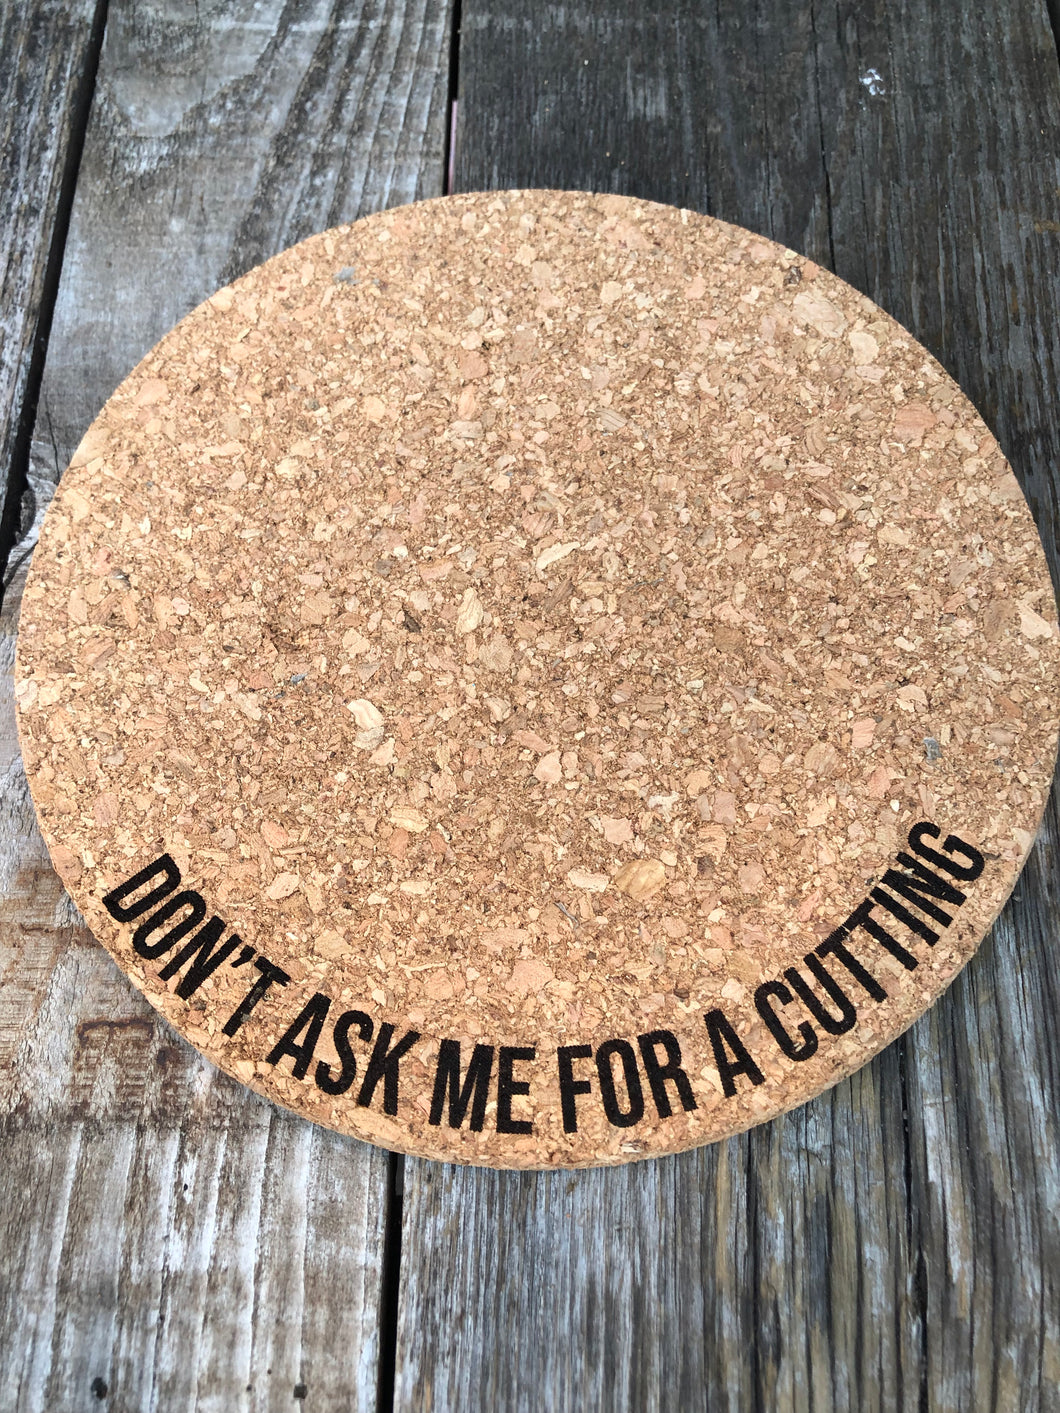 Don't Ask Me For A Cutting Cork Plant Mat - Engraved Cork Round - Cork Bottom - No Plastic or Rubber - All Natural Material